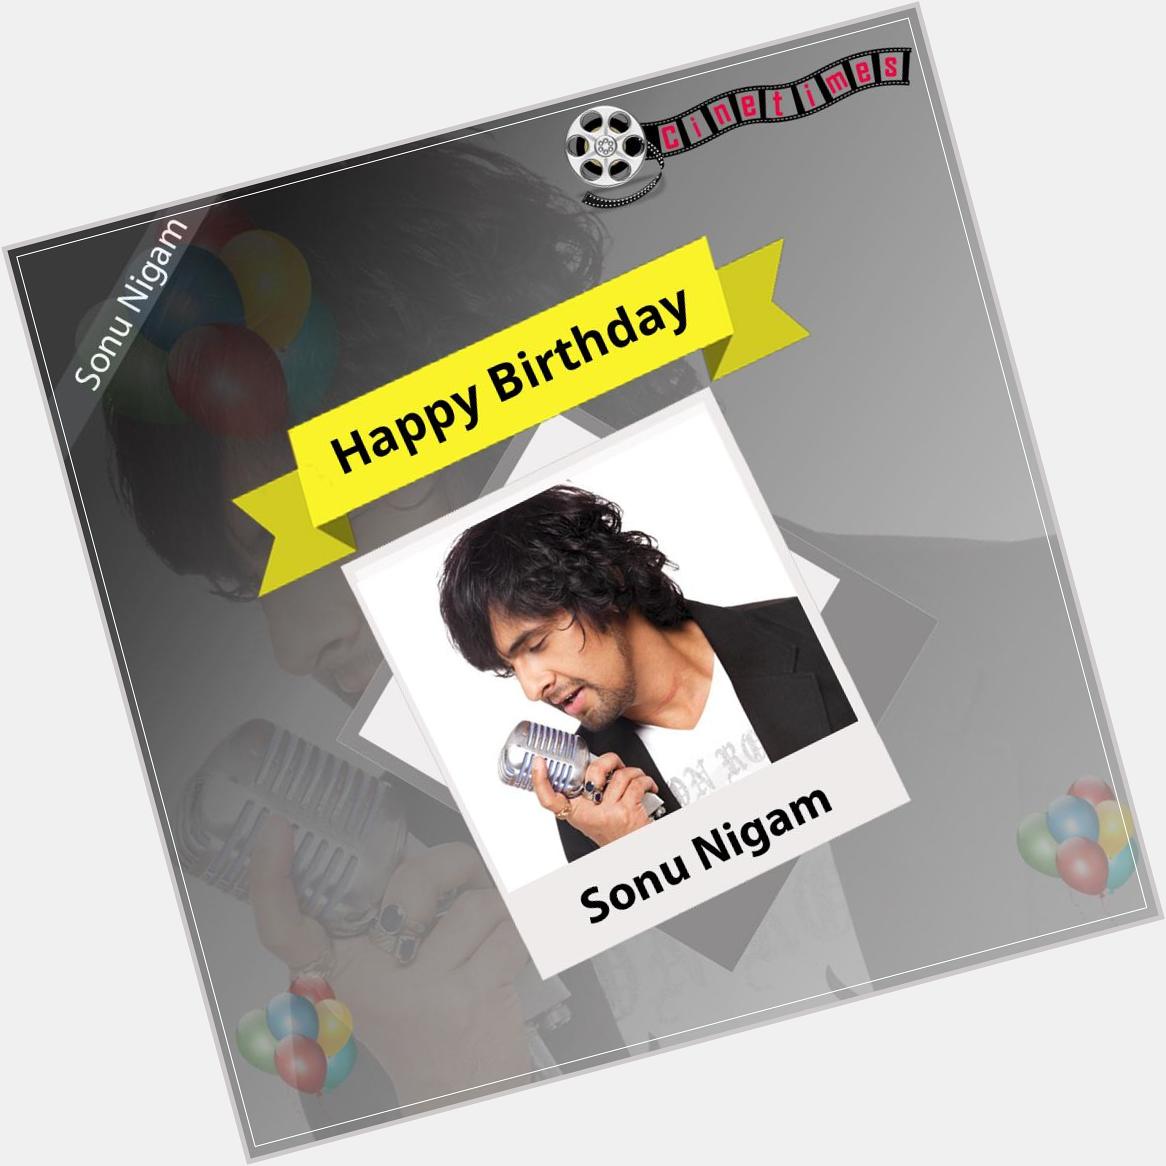 Join us in Wishing Singer Sonu Nigam A Very Happy Birthday 